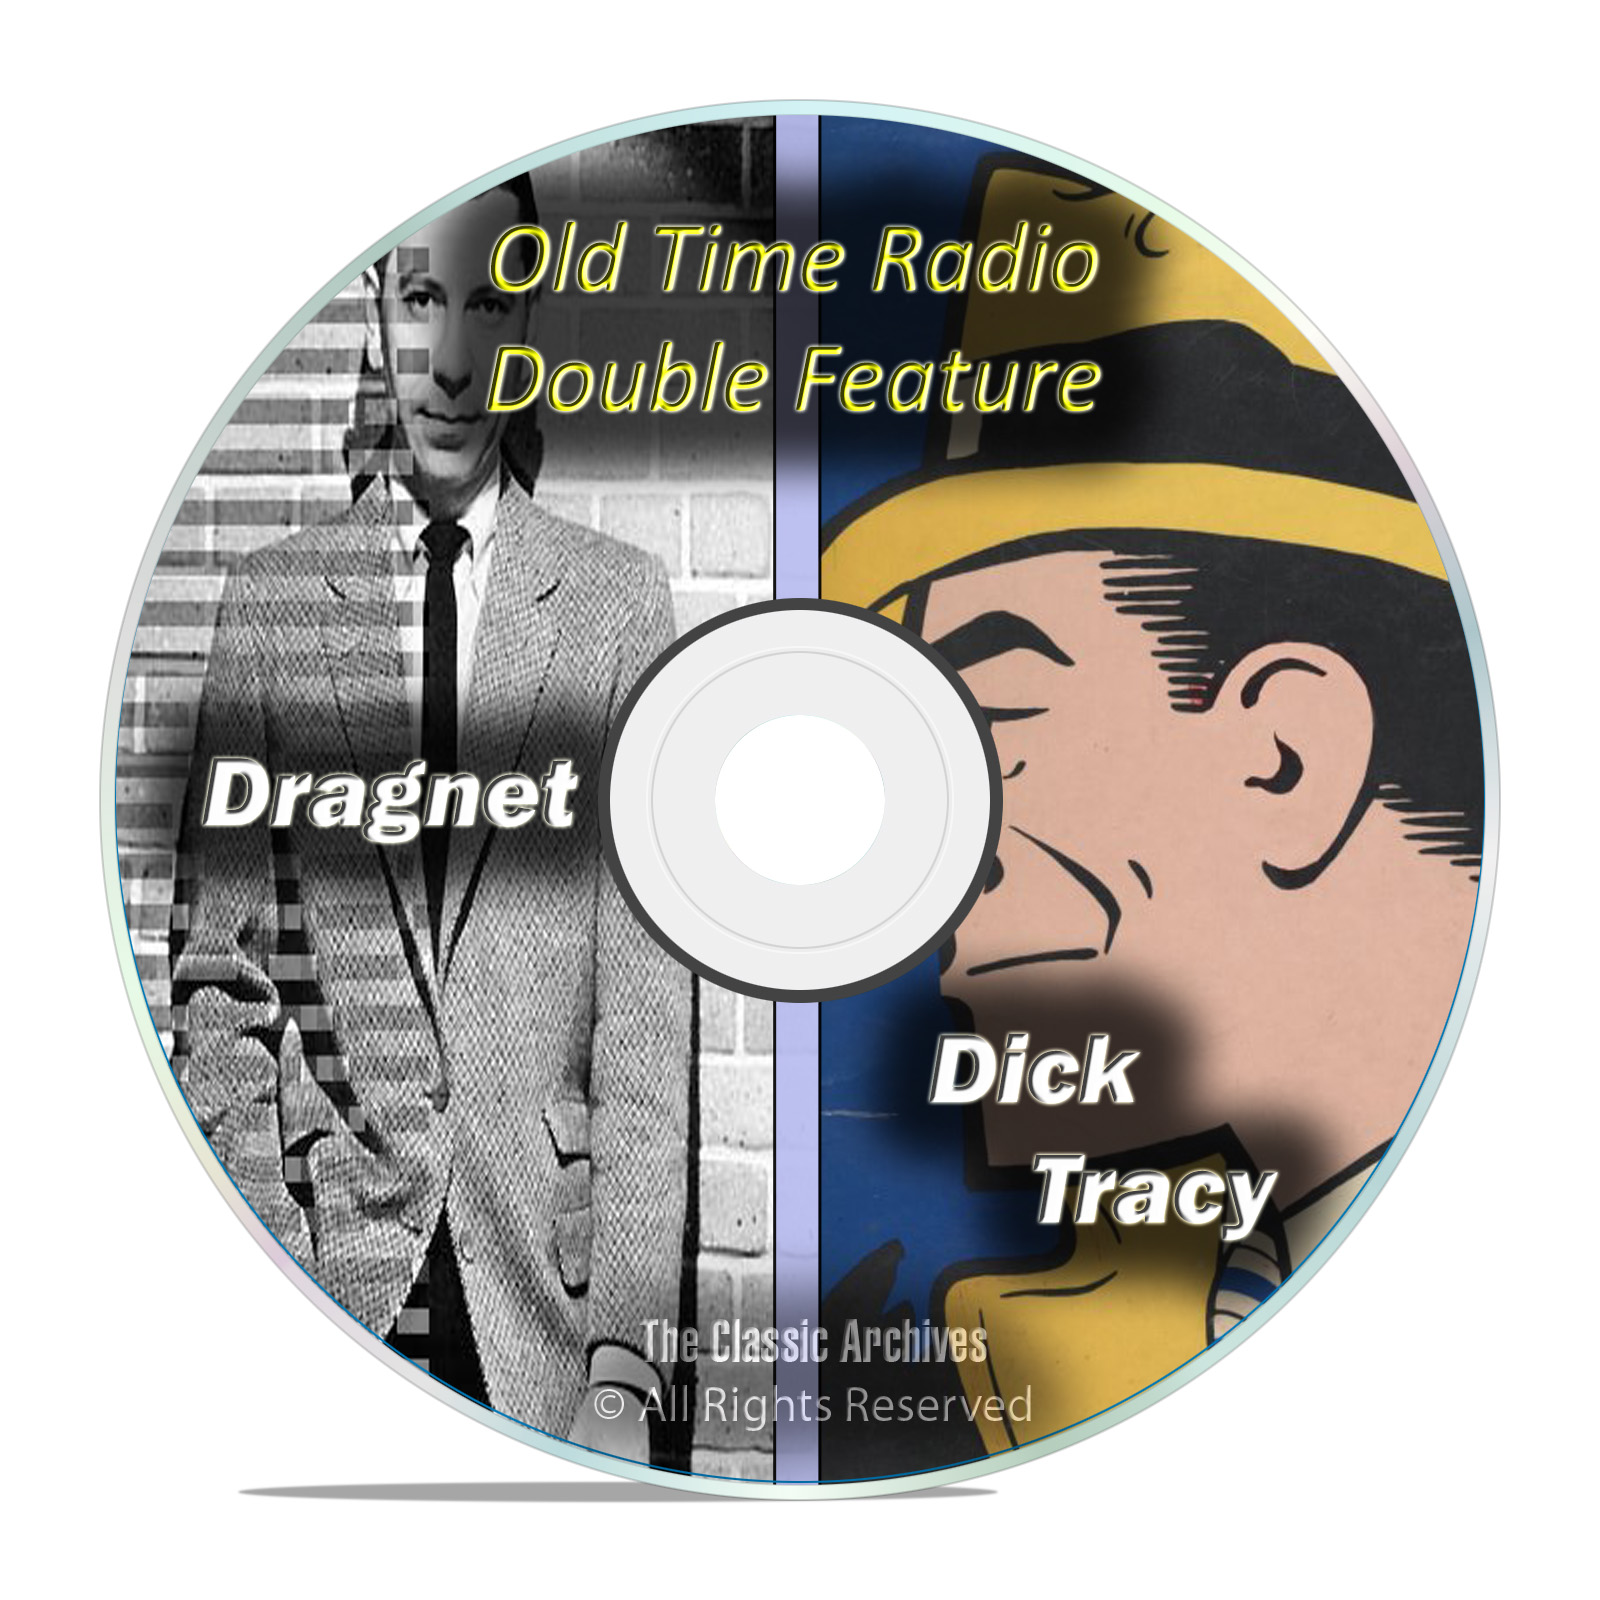 Dragnet, Dick Tracy, 443 Shows, ALL Known Episodes, Old Time Radio, OTR DVD